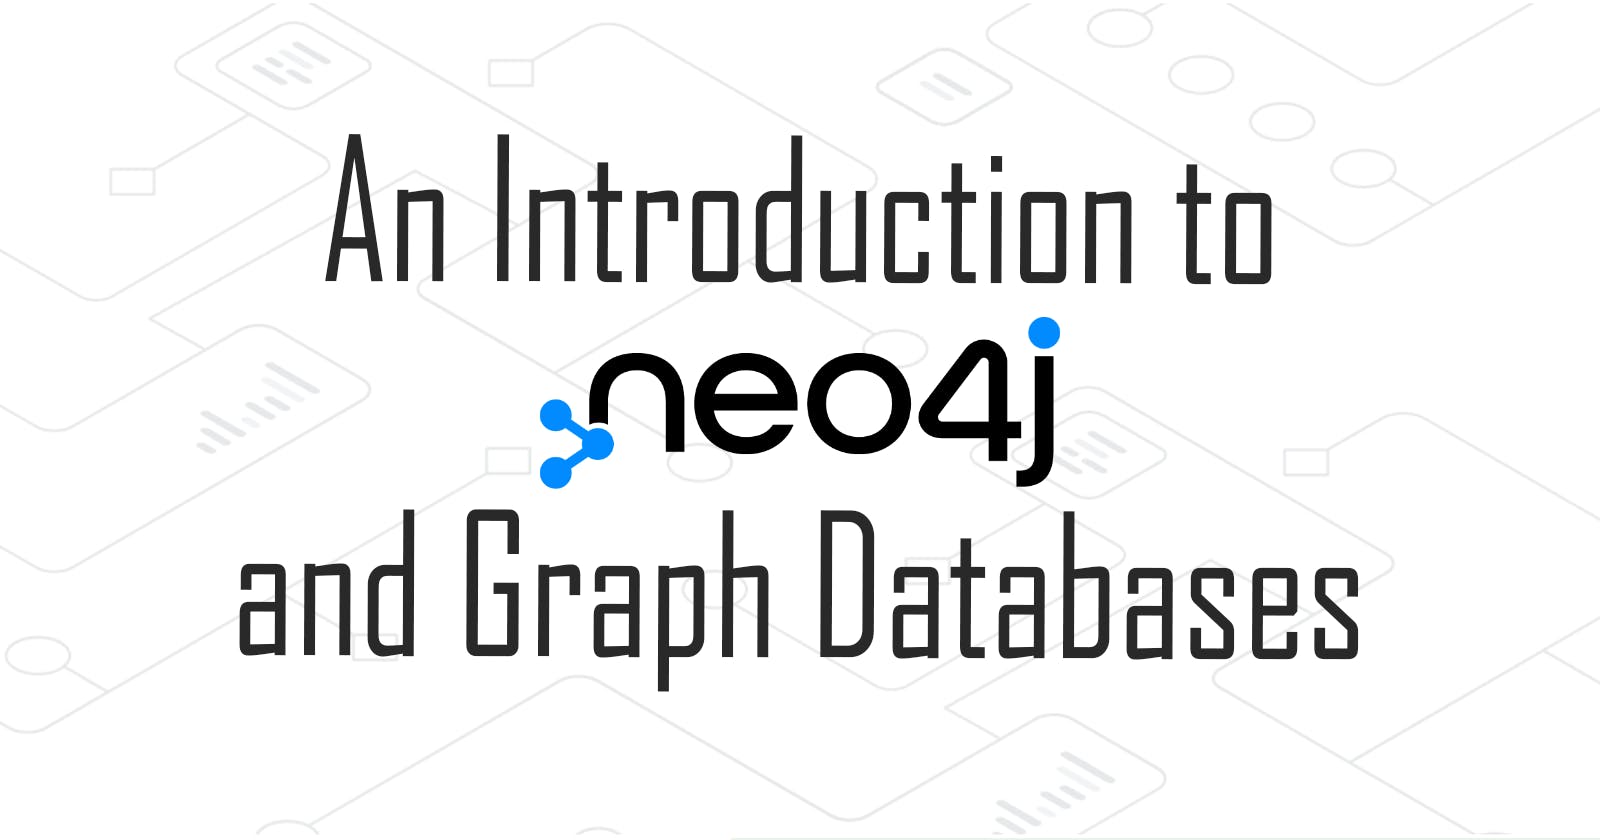 An Introduction to Neo4J and Graph Databases